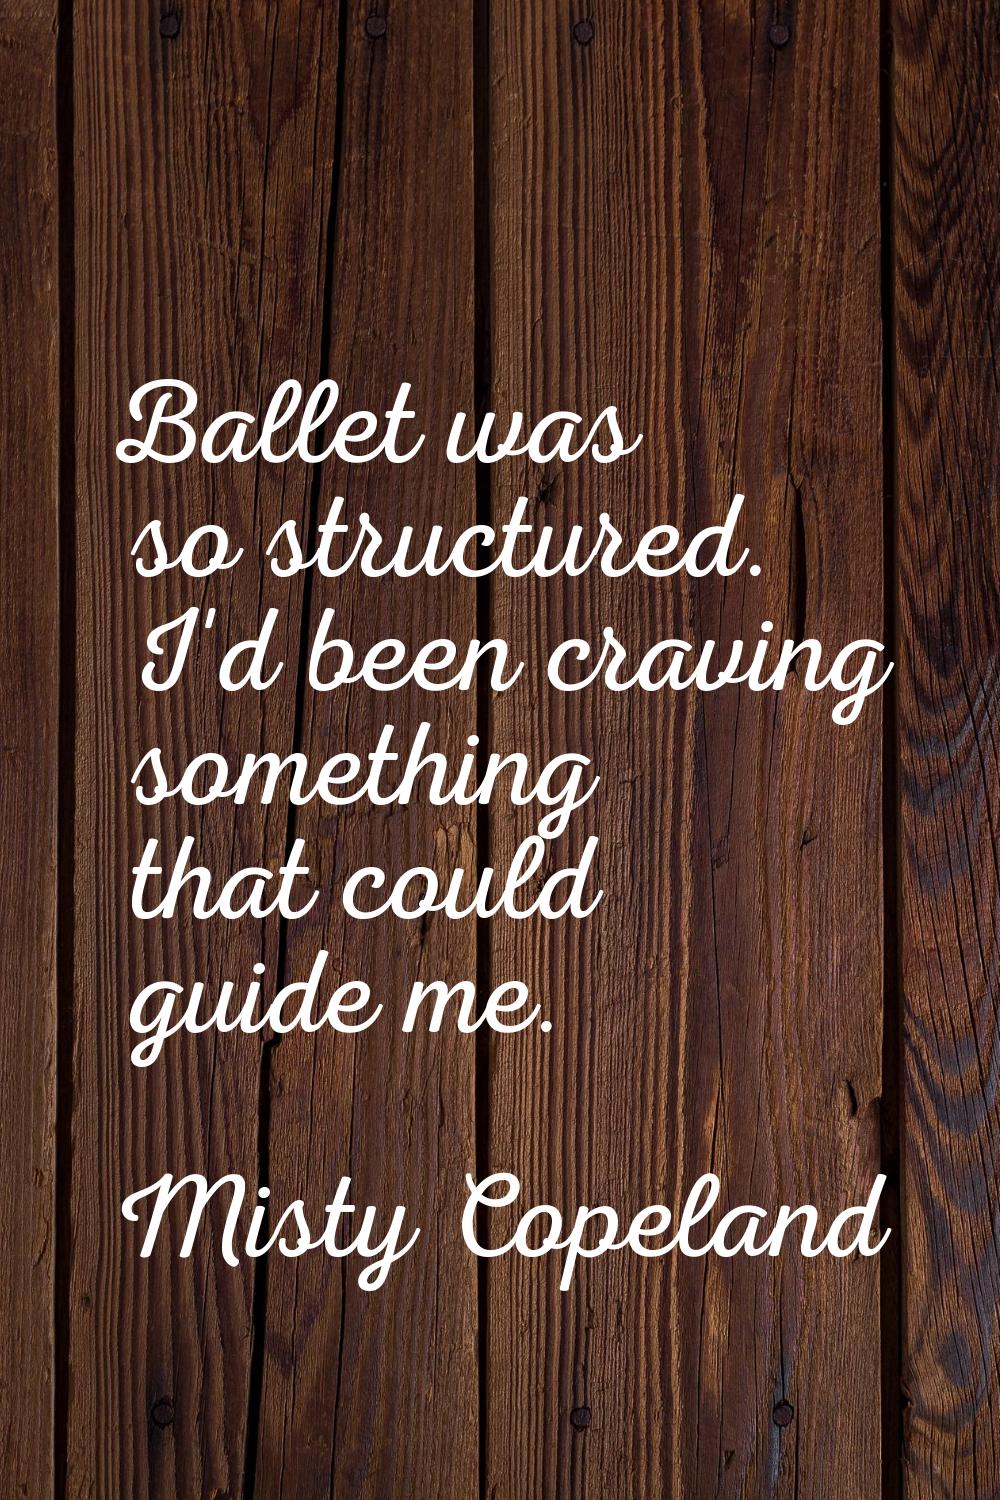 Ballet was so structured. I'd been craving something that could guide me.